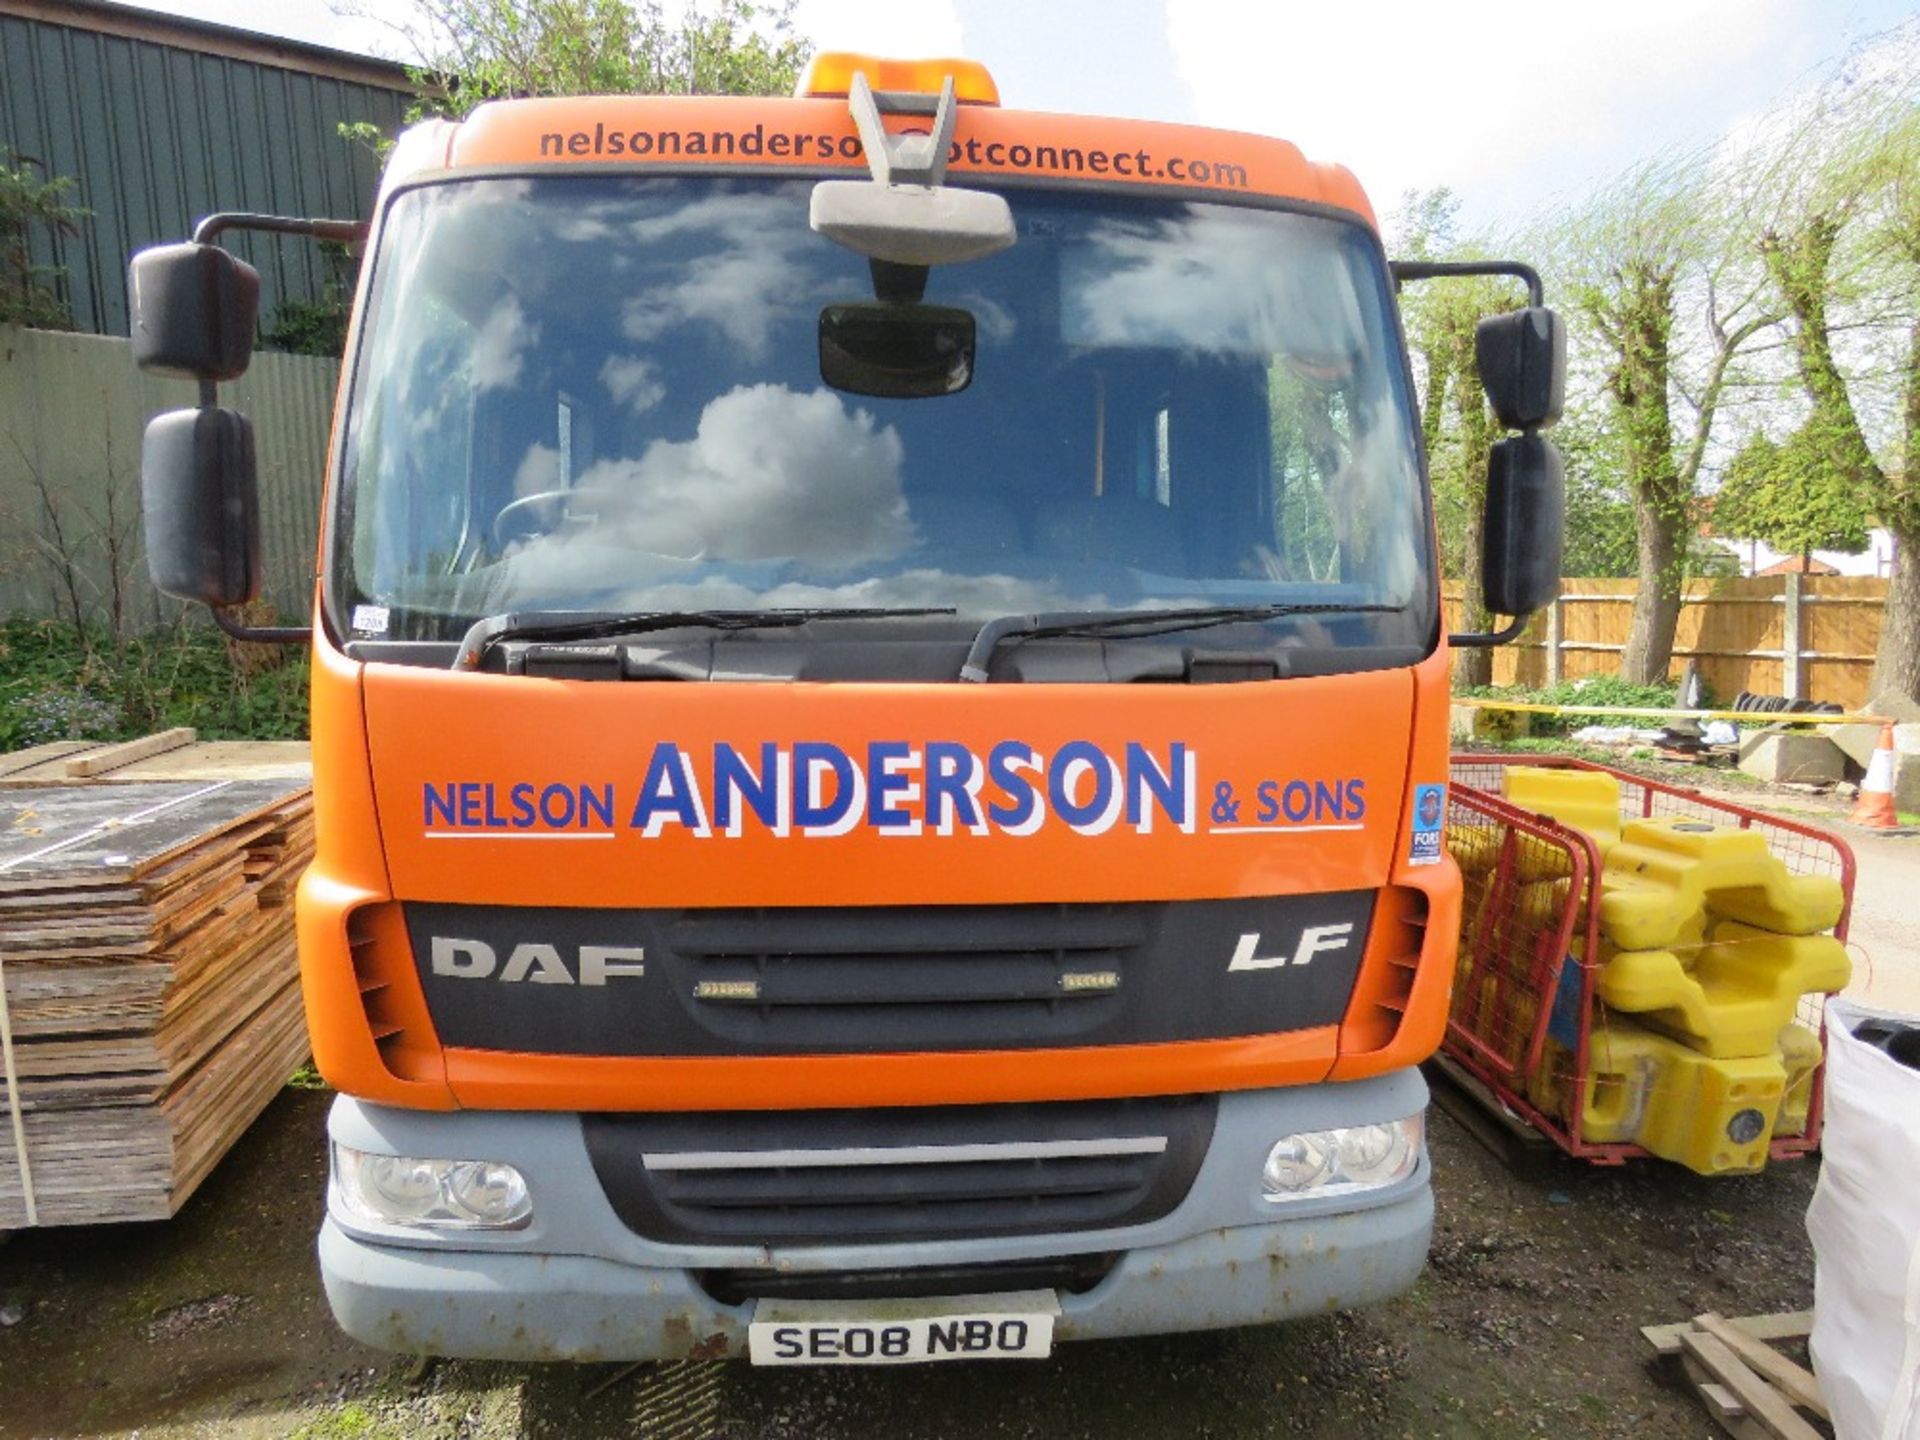 DAF LF45.160 08E CREW CAB LORRY 7500KG RATED. REG: SE08 NBO WITH V5 WHEN TESTED WAS SEEN TO RUN, D - Image 2 of 8